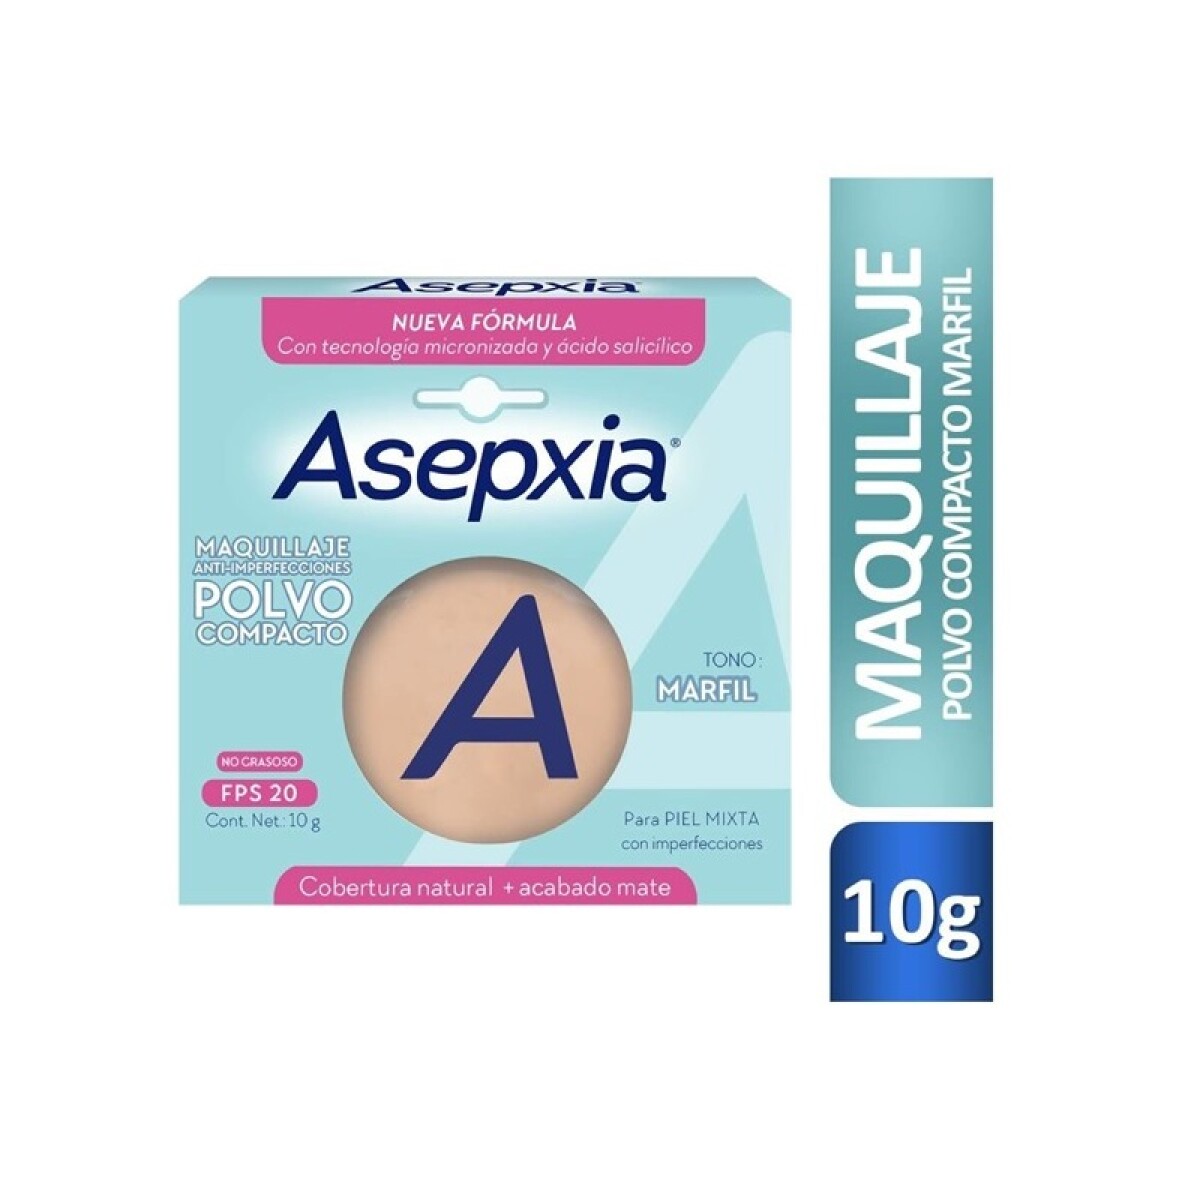 Maquillaje Asepxia Polvo 10 Grs. - Marfil 